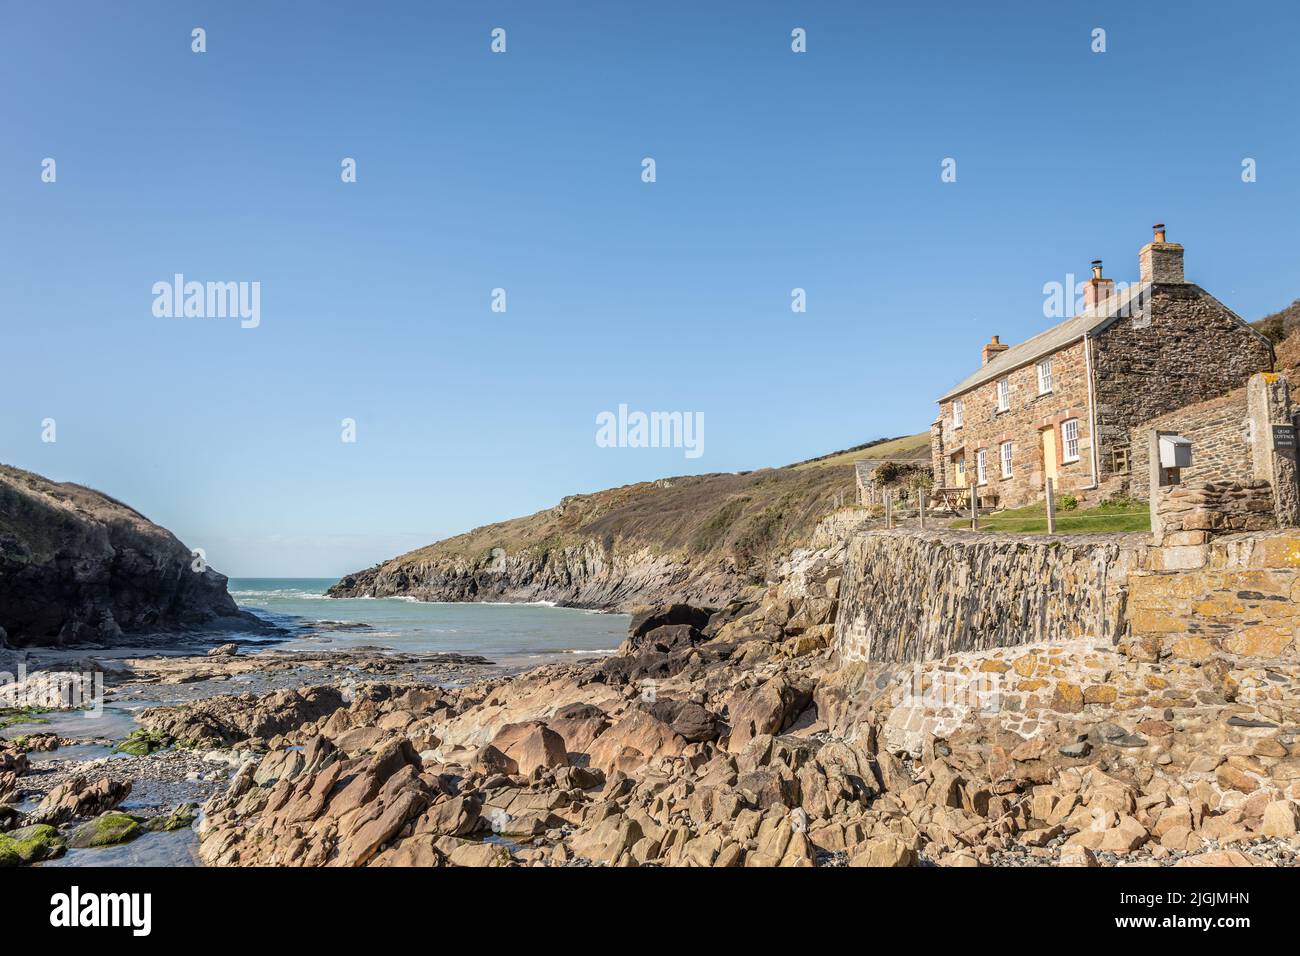 View of the Harbour and Beach at Port Quin, Cornwall, England, UK Stock Photo